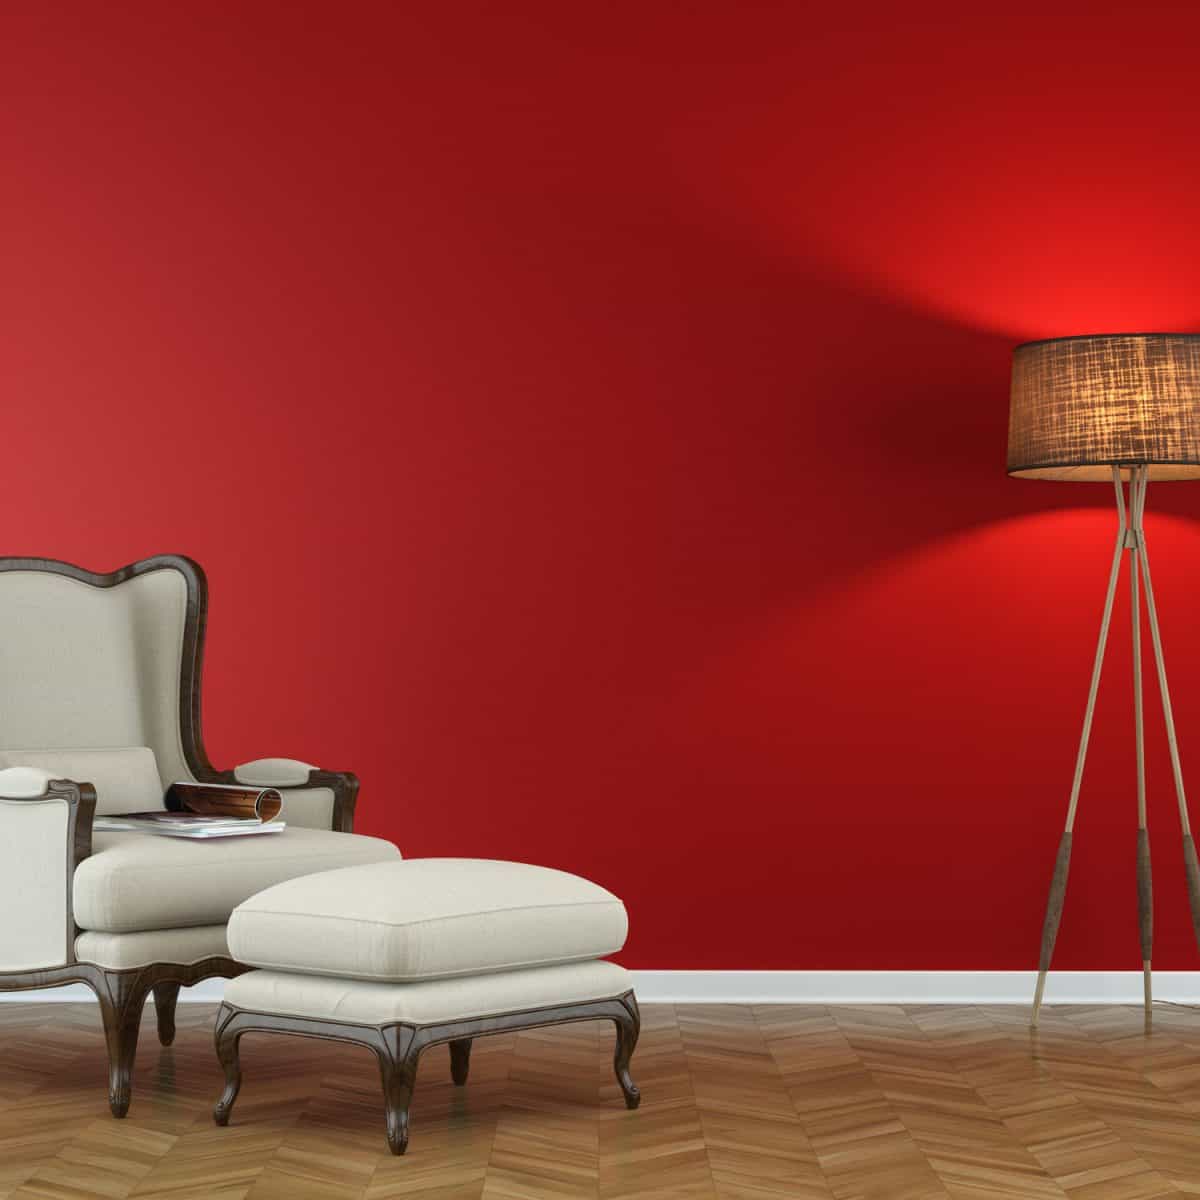 A red colored wall with diagonal laminated flooring